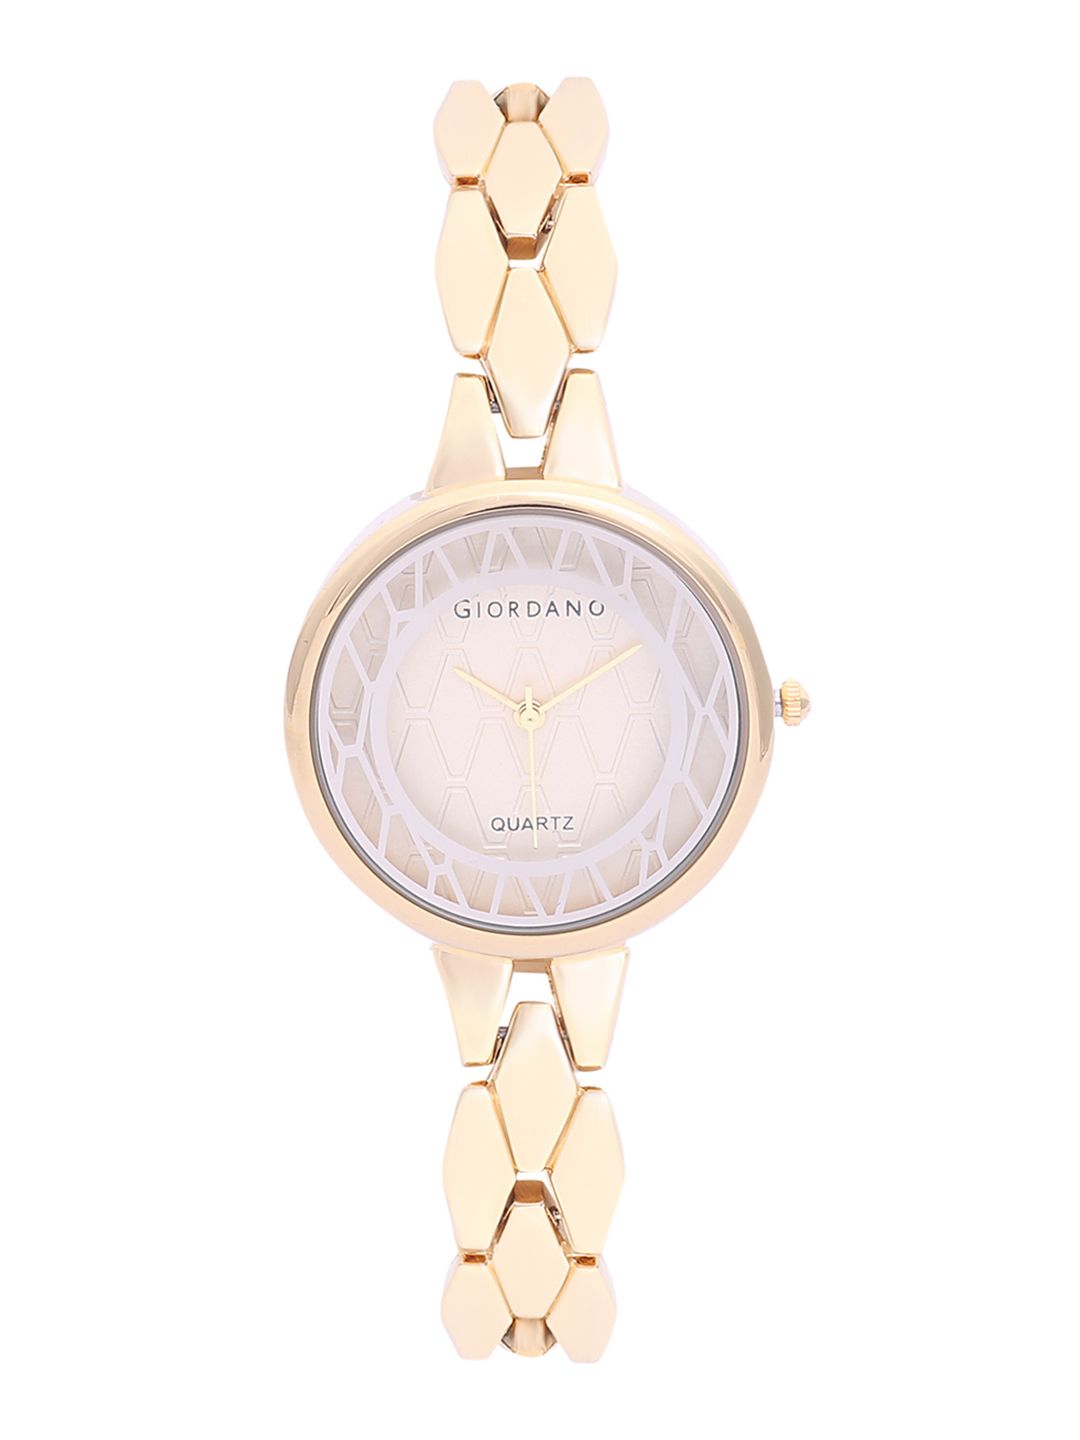 GIORDANO Women Gold-Toned Analogue Watch C2157 Price in India